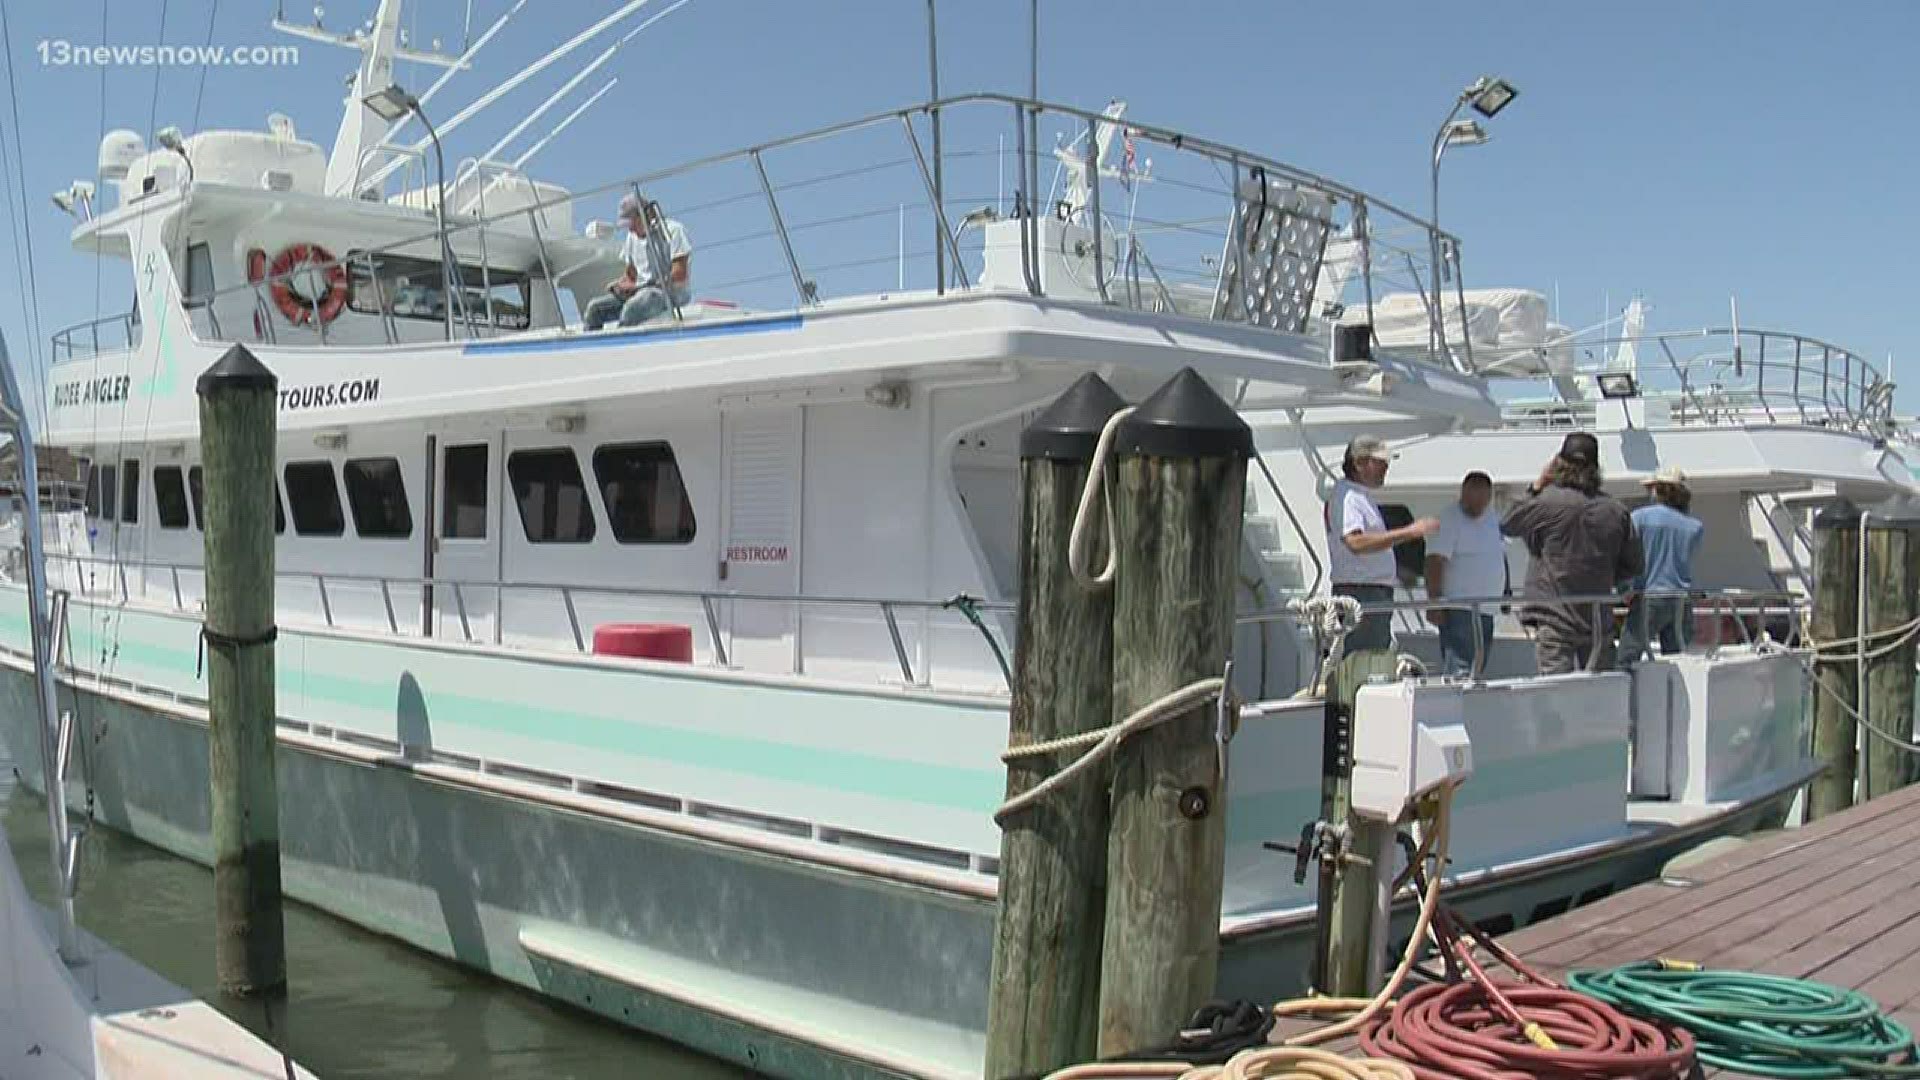 13News Now Ali Weatherton spoke to the owners of a local chartering company on the return of charter fishing trips as Virginia reopens during the pandemic.